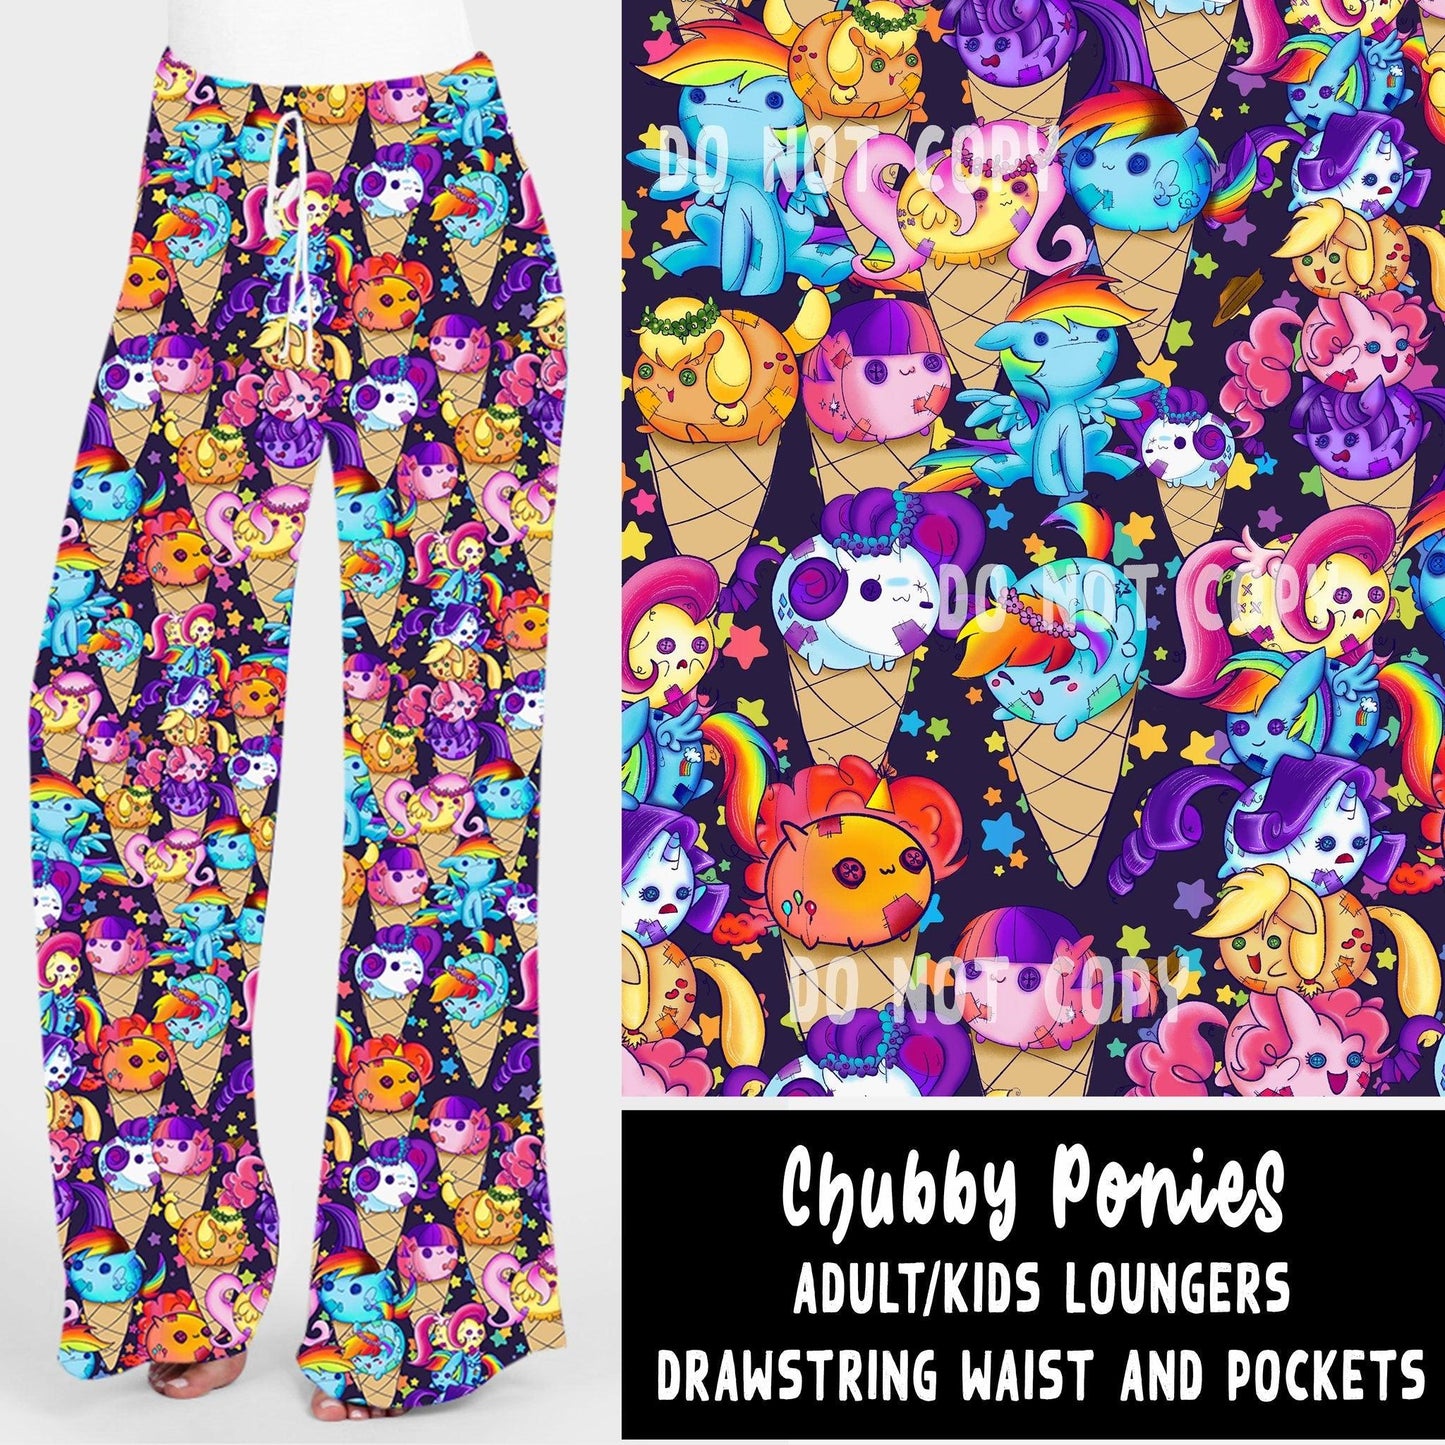 SPRING BASH RUN-CHUBBY PONIES ADULT/KIDS LOUNGER- PREORDER CLOSING 12/17